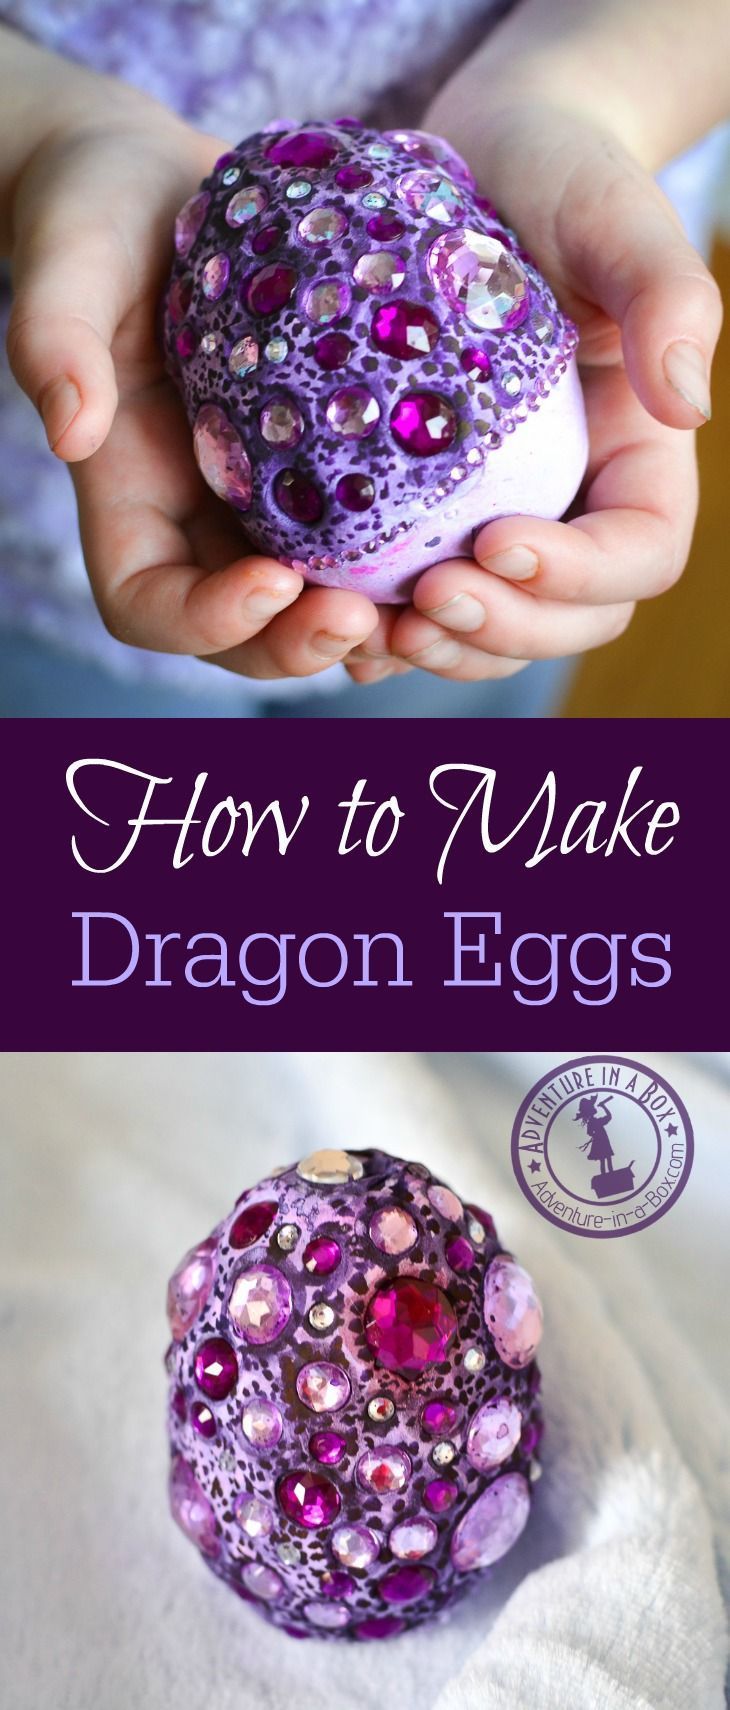 How to Make Fantasy Dragon Eggs -   25 young kids crafts
 ideas